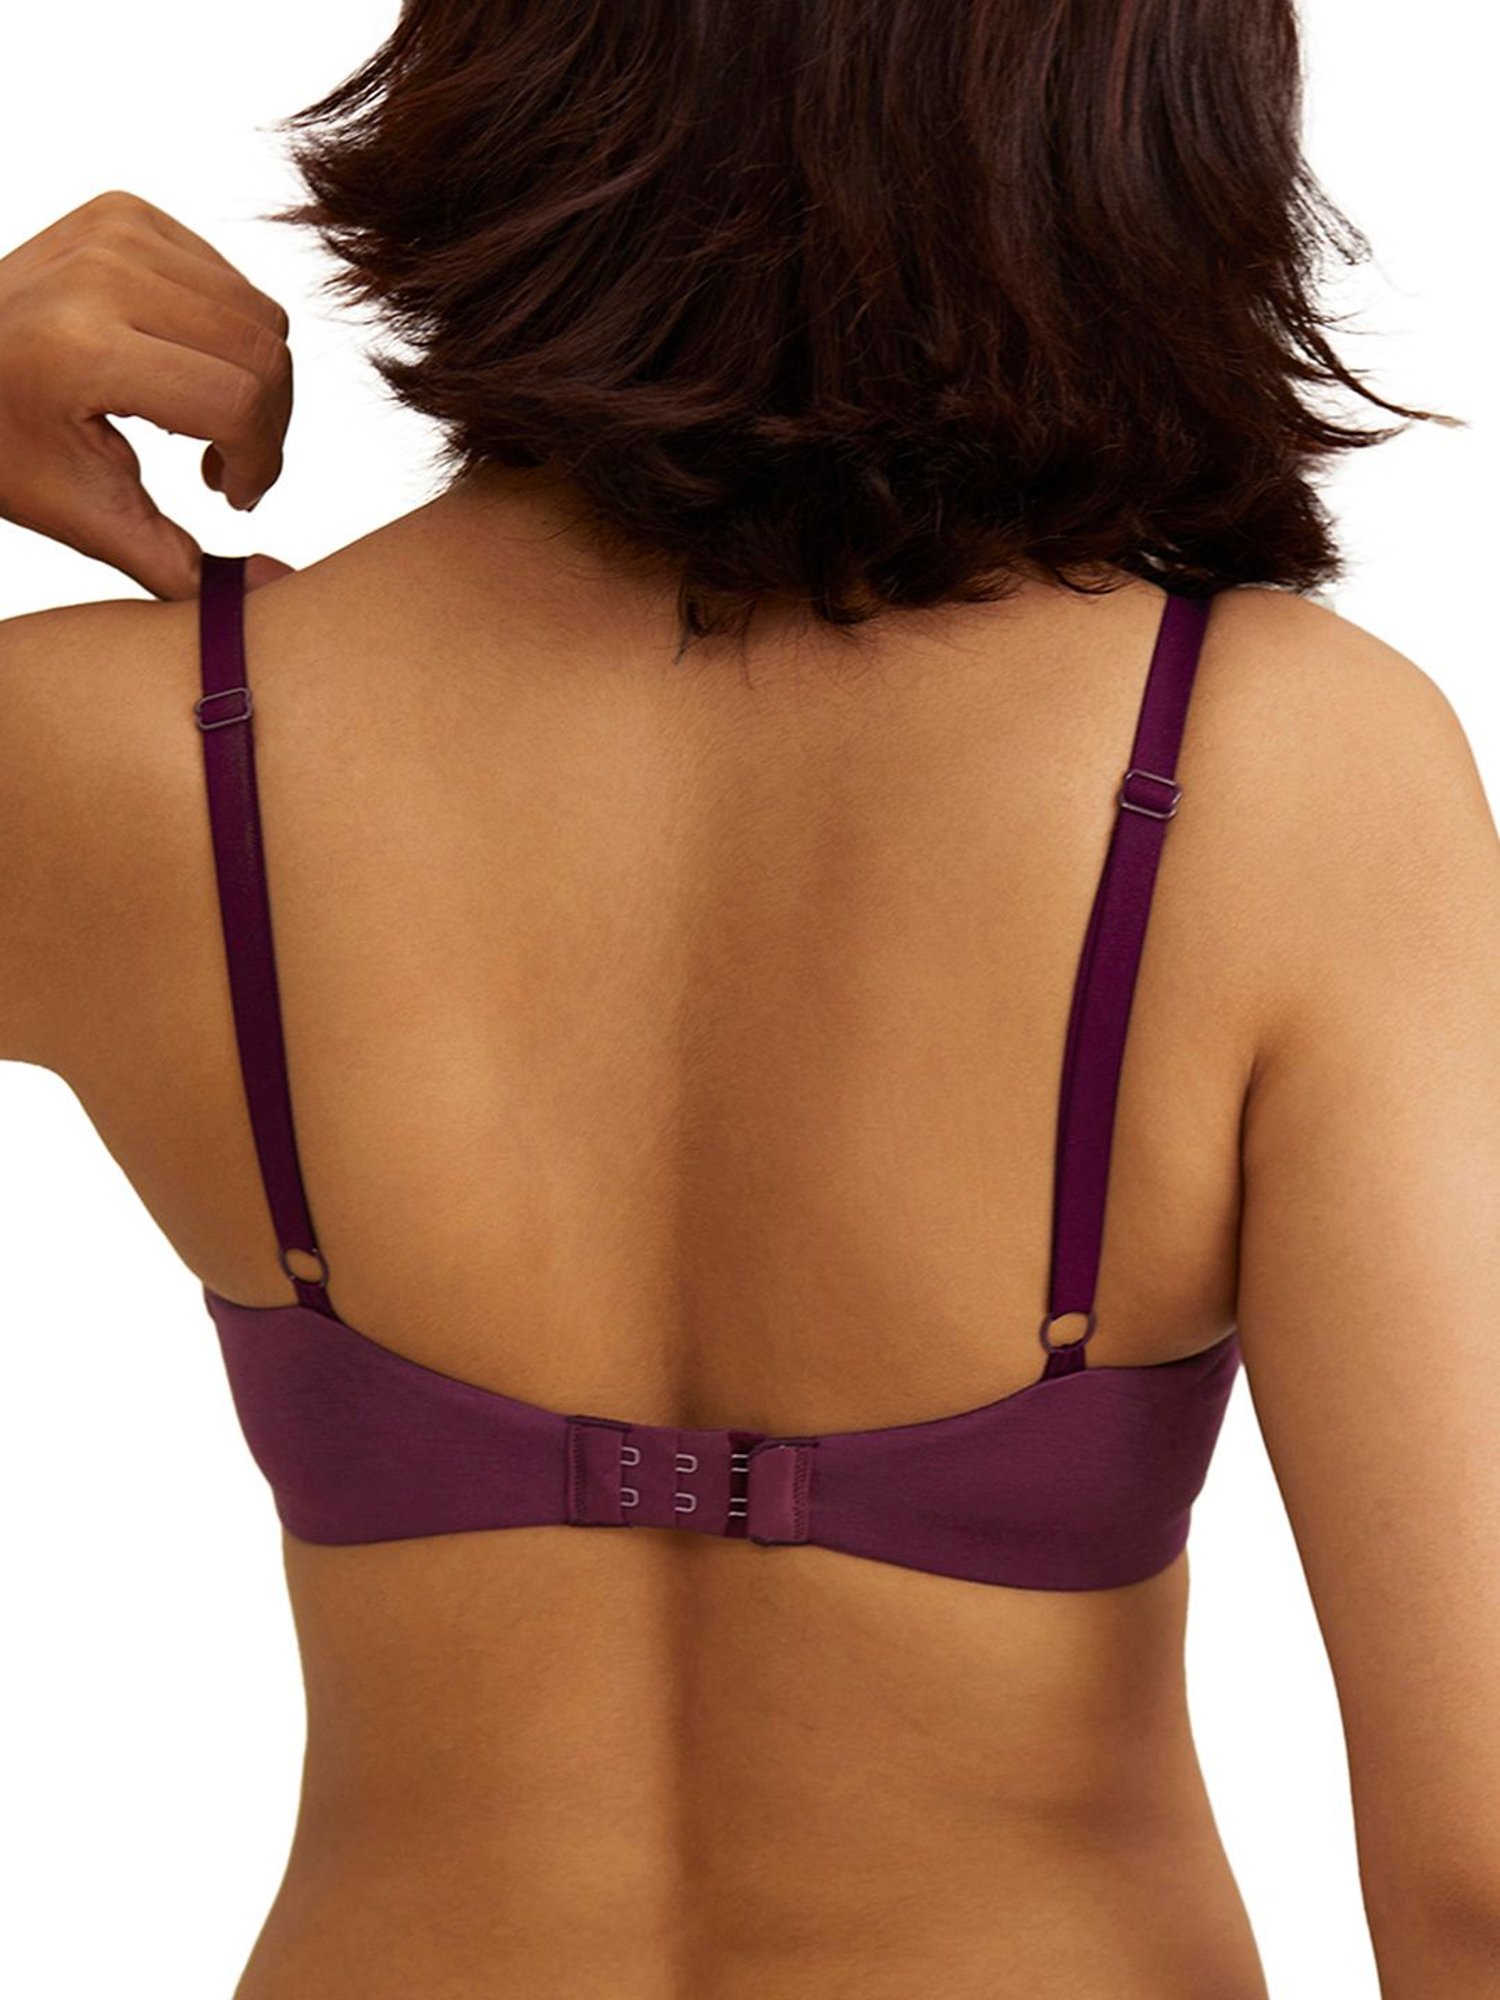 Nykd Flawless Me Breast Separator Cotton Bra - Non Padded, Wireless, Full  Coverage - Maroon